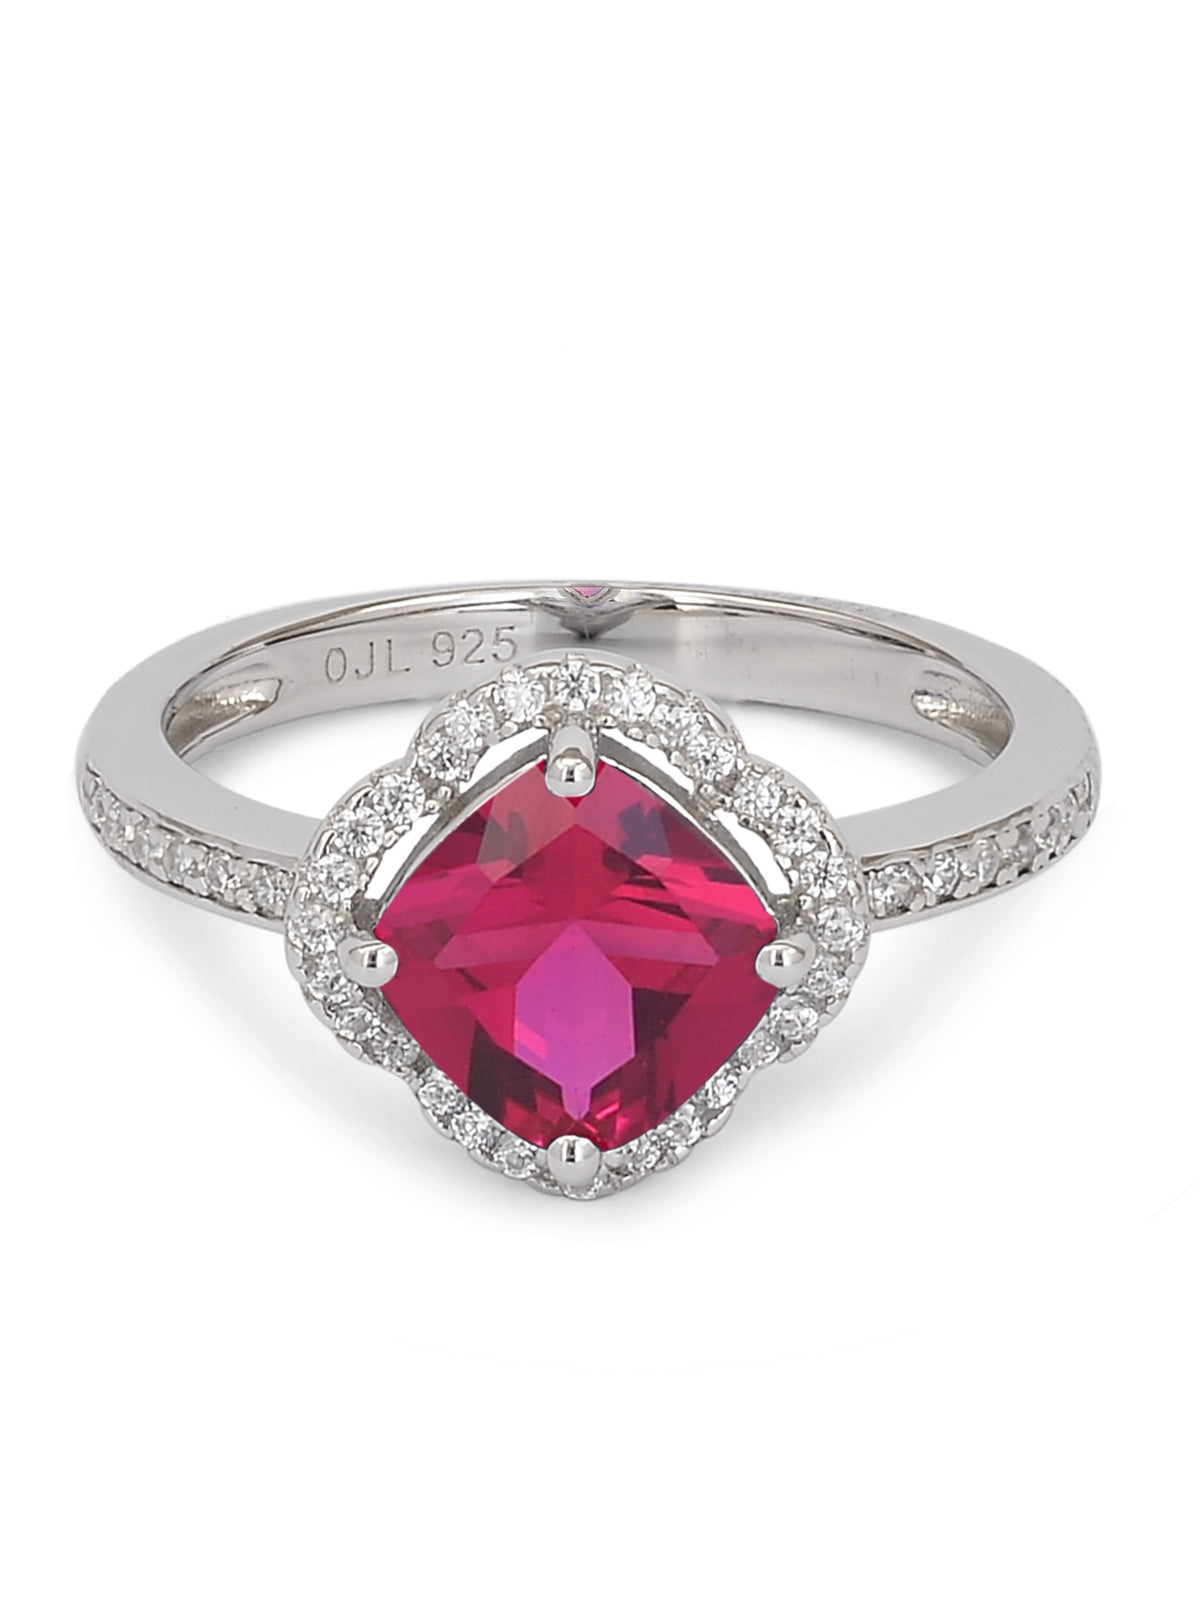 1.5 CARAT RUBY RED FLOWER SHAPE RING